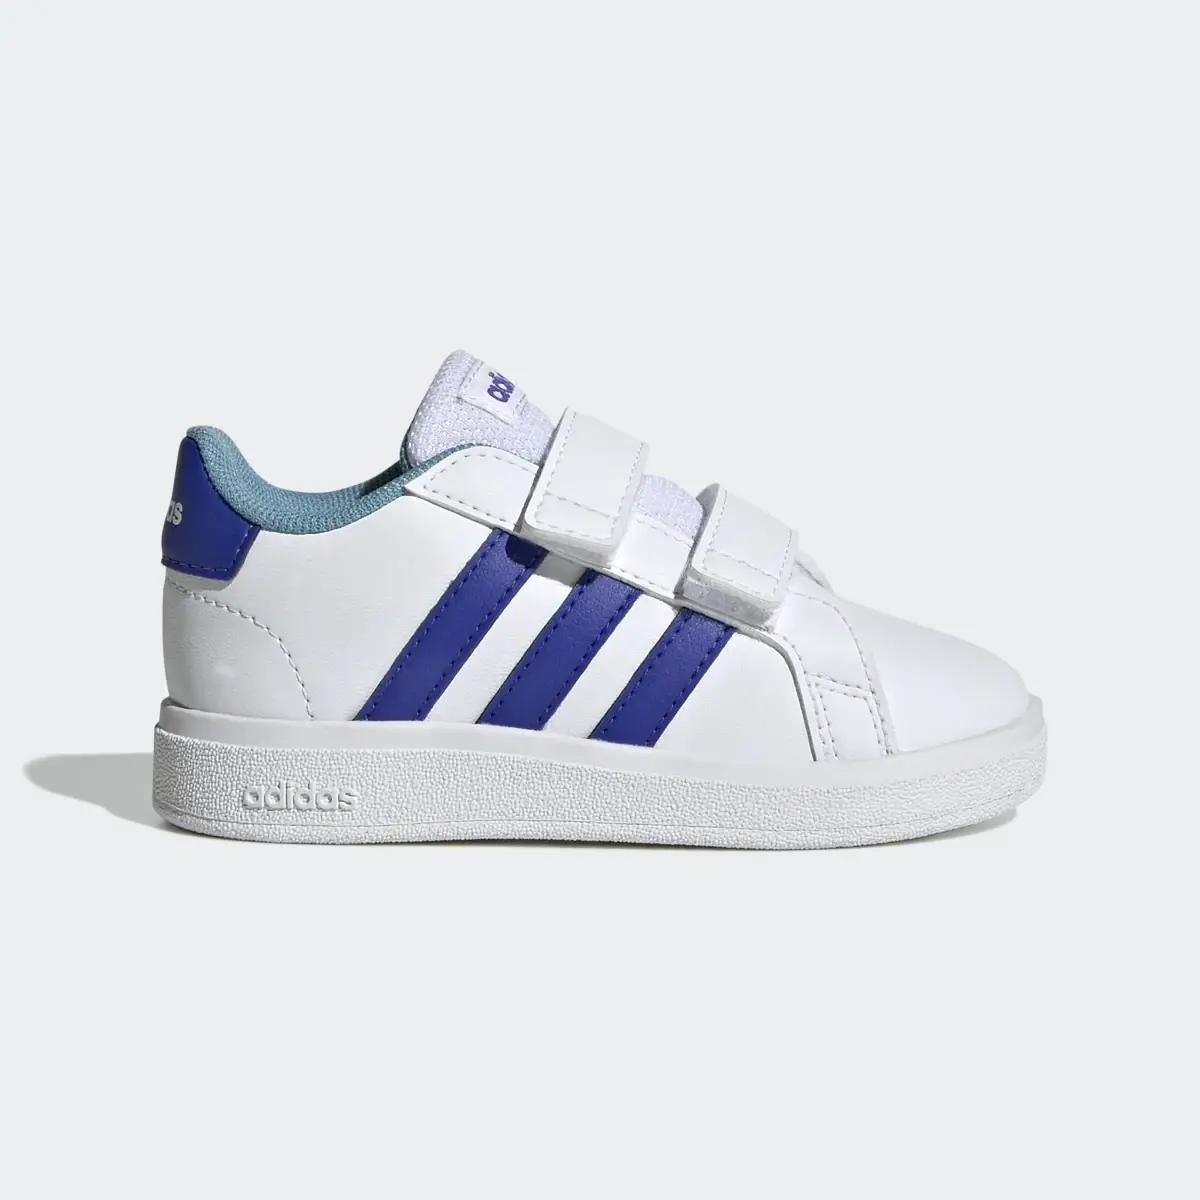 Adidas Grand Court 2.0 Shoes. 2